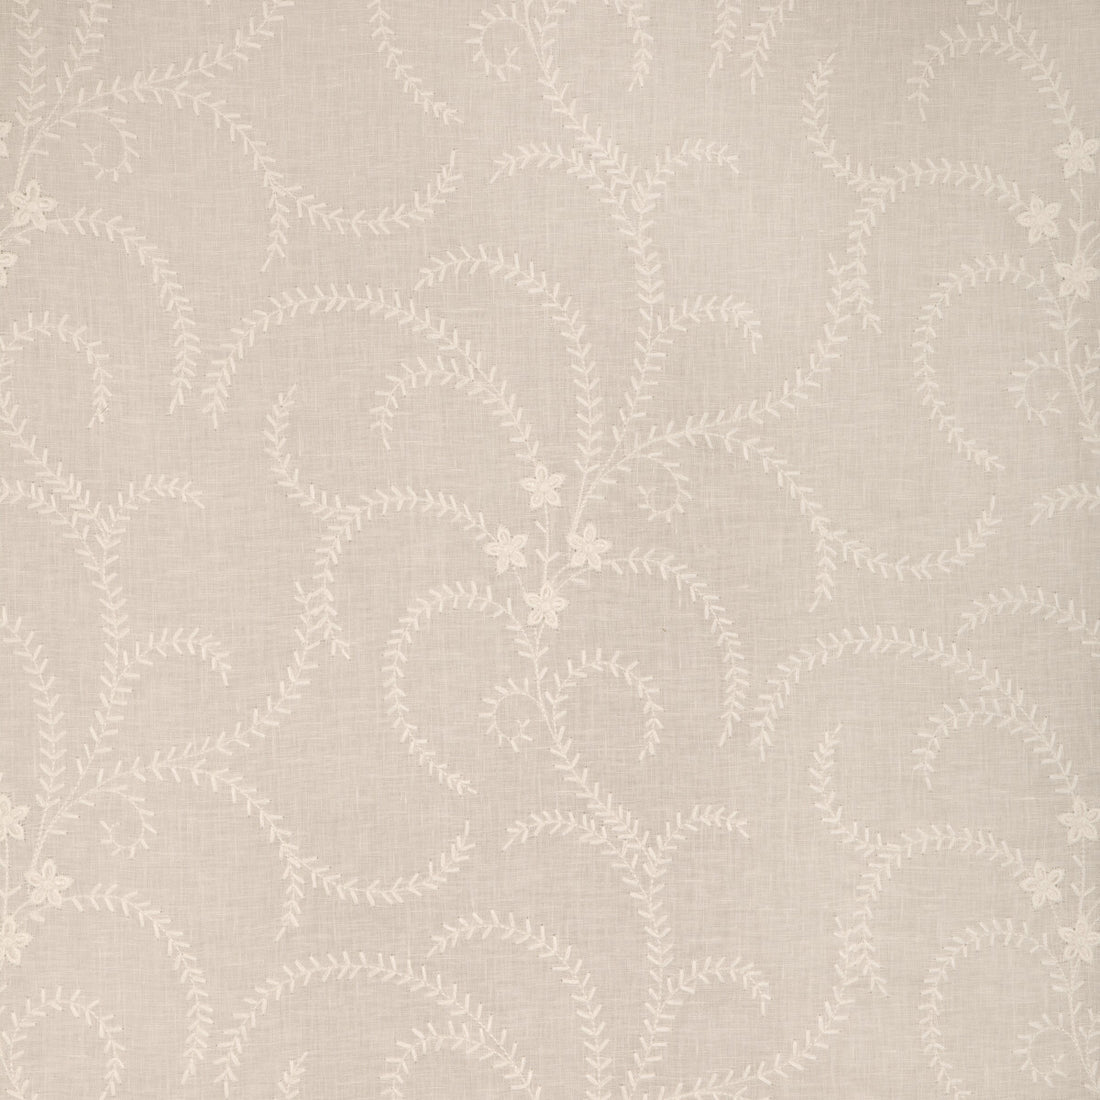 Gerbaud Sheer fabric in ivory color - pattern 8023111.1.0 - by Brunschwig &amp; Fils in the Anduze Embroideries collection